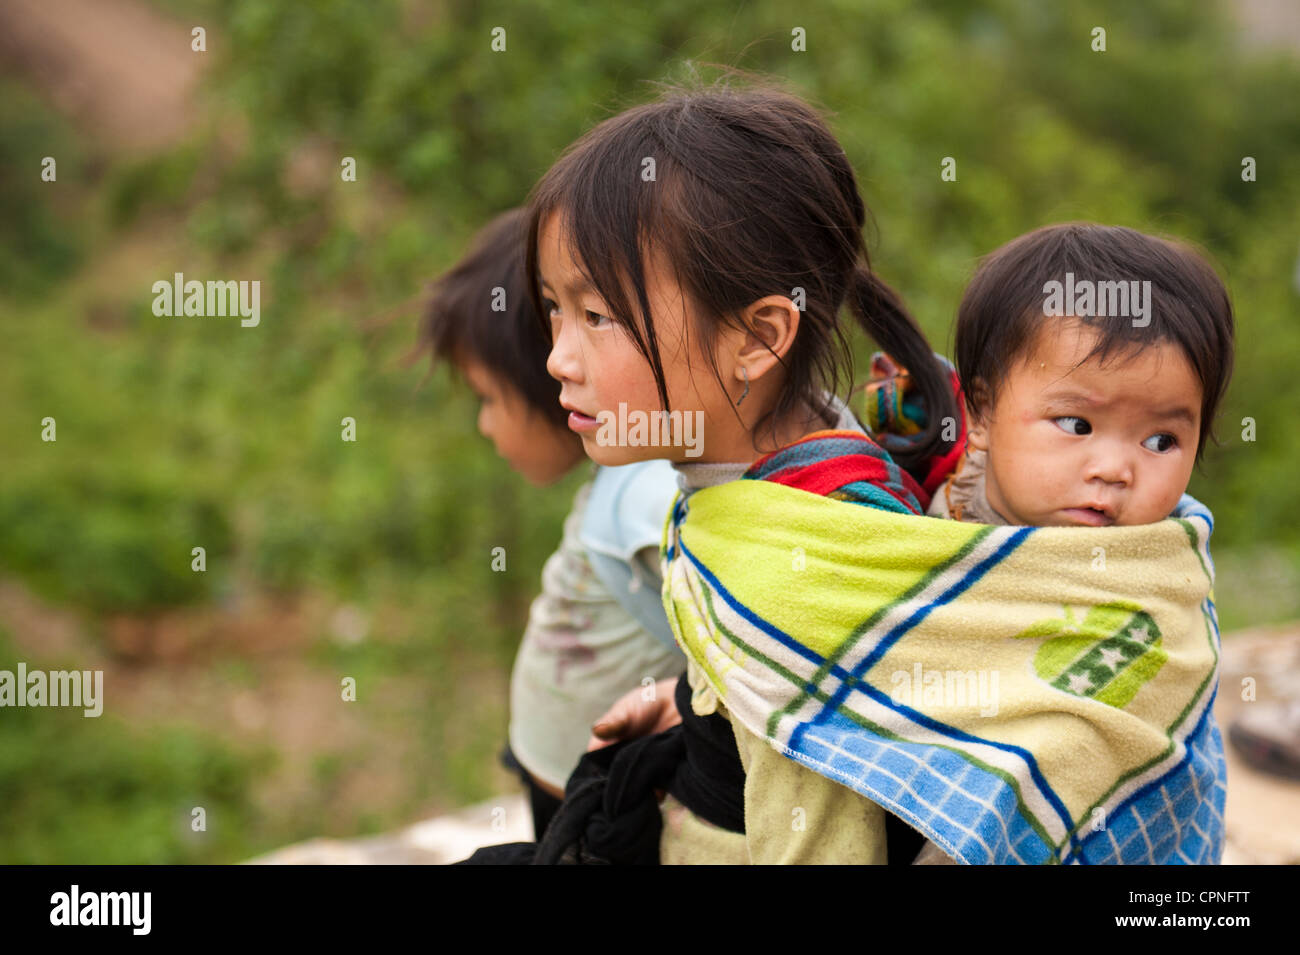 H'Mong girl carrying baby sister Banque D'Images